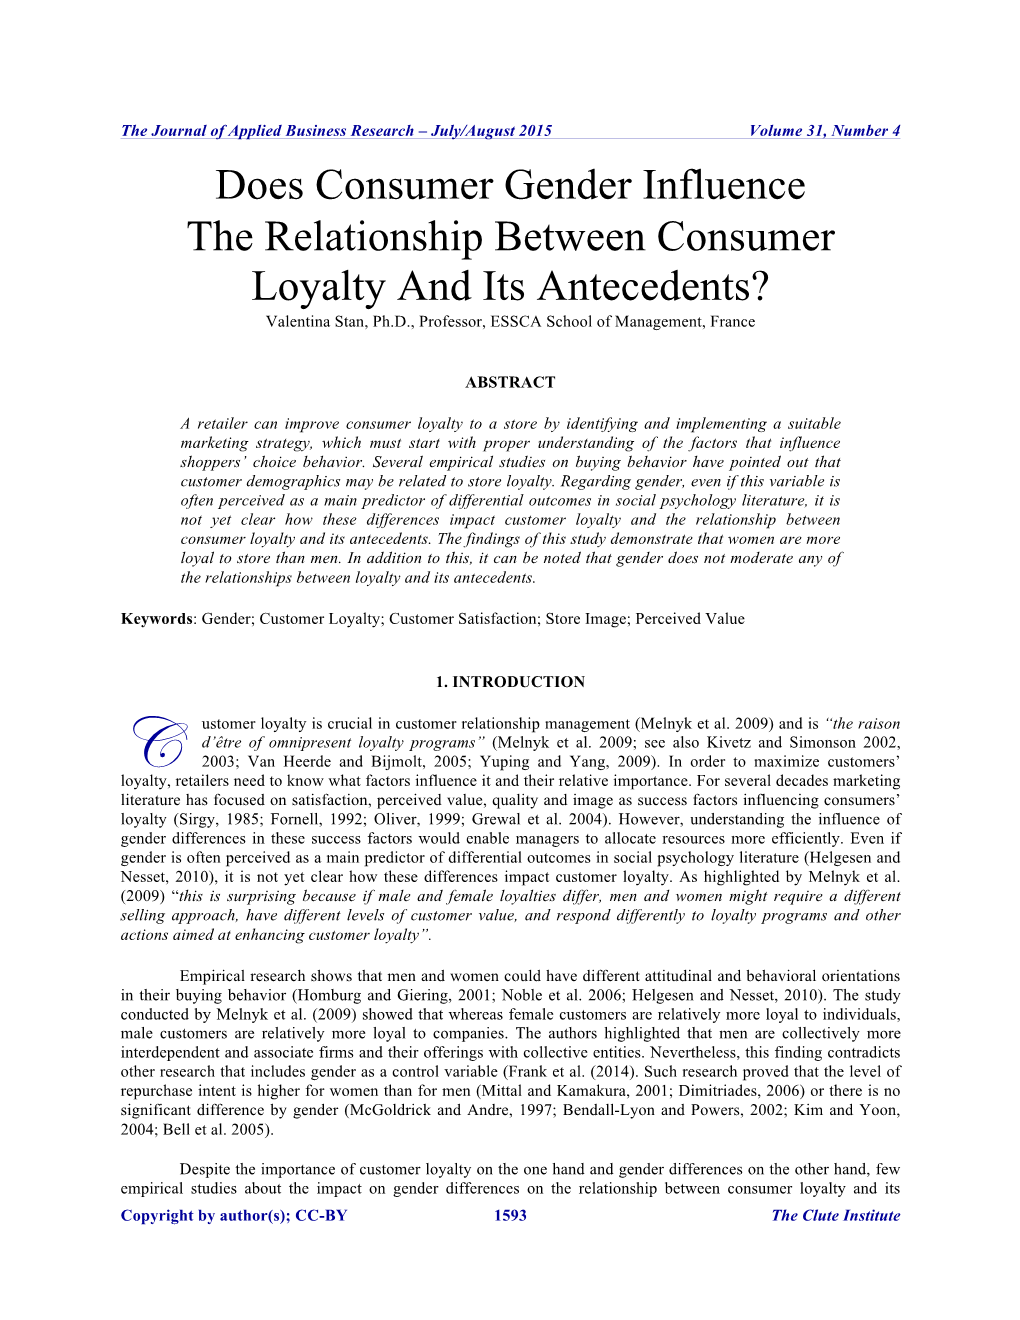 Does Consumer Gender Influence the Relationship Between Consumer Loyalty and Its Antecedents? Valentina Stan, Ph.D., Professor, ESSCA School of Management, France